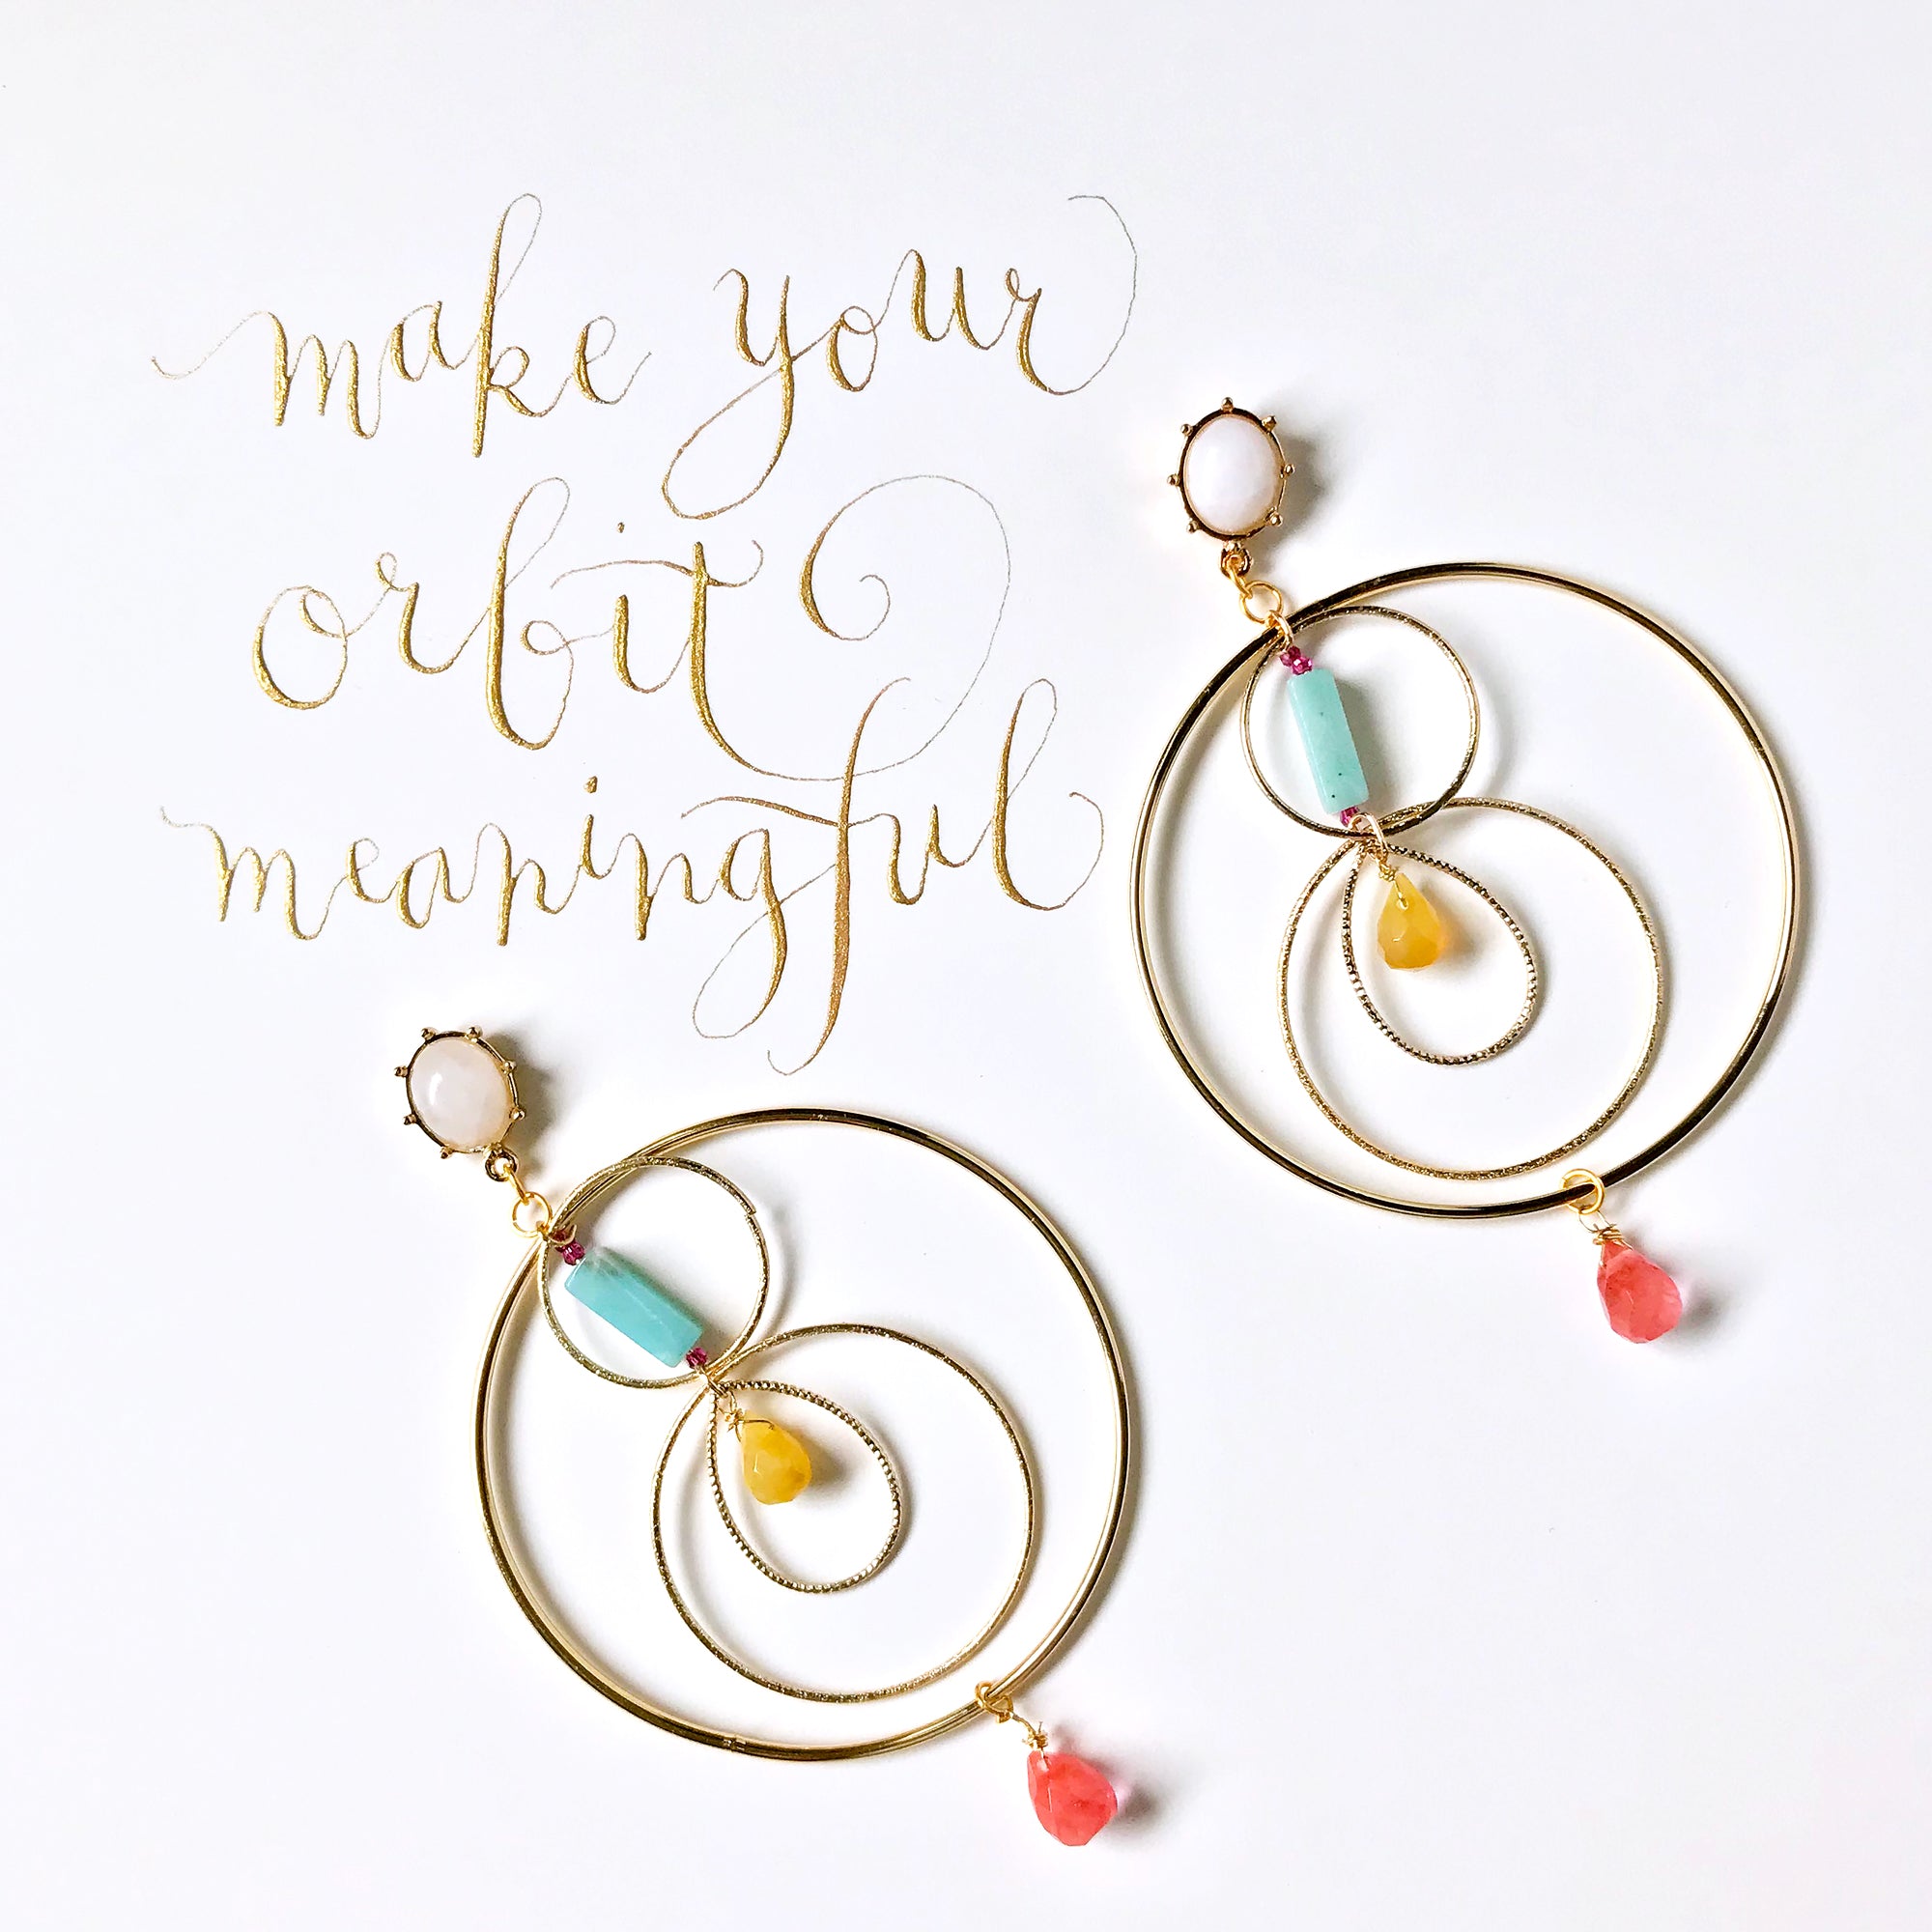 #SequinSayings - Make Your Orbit Meaningful